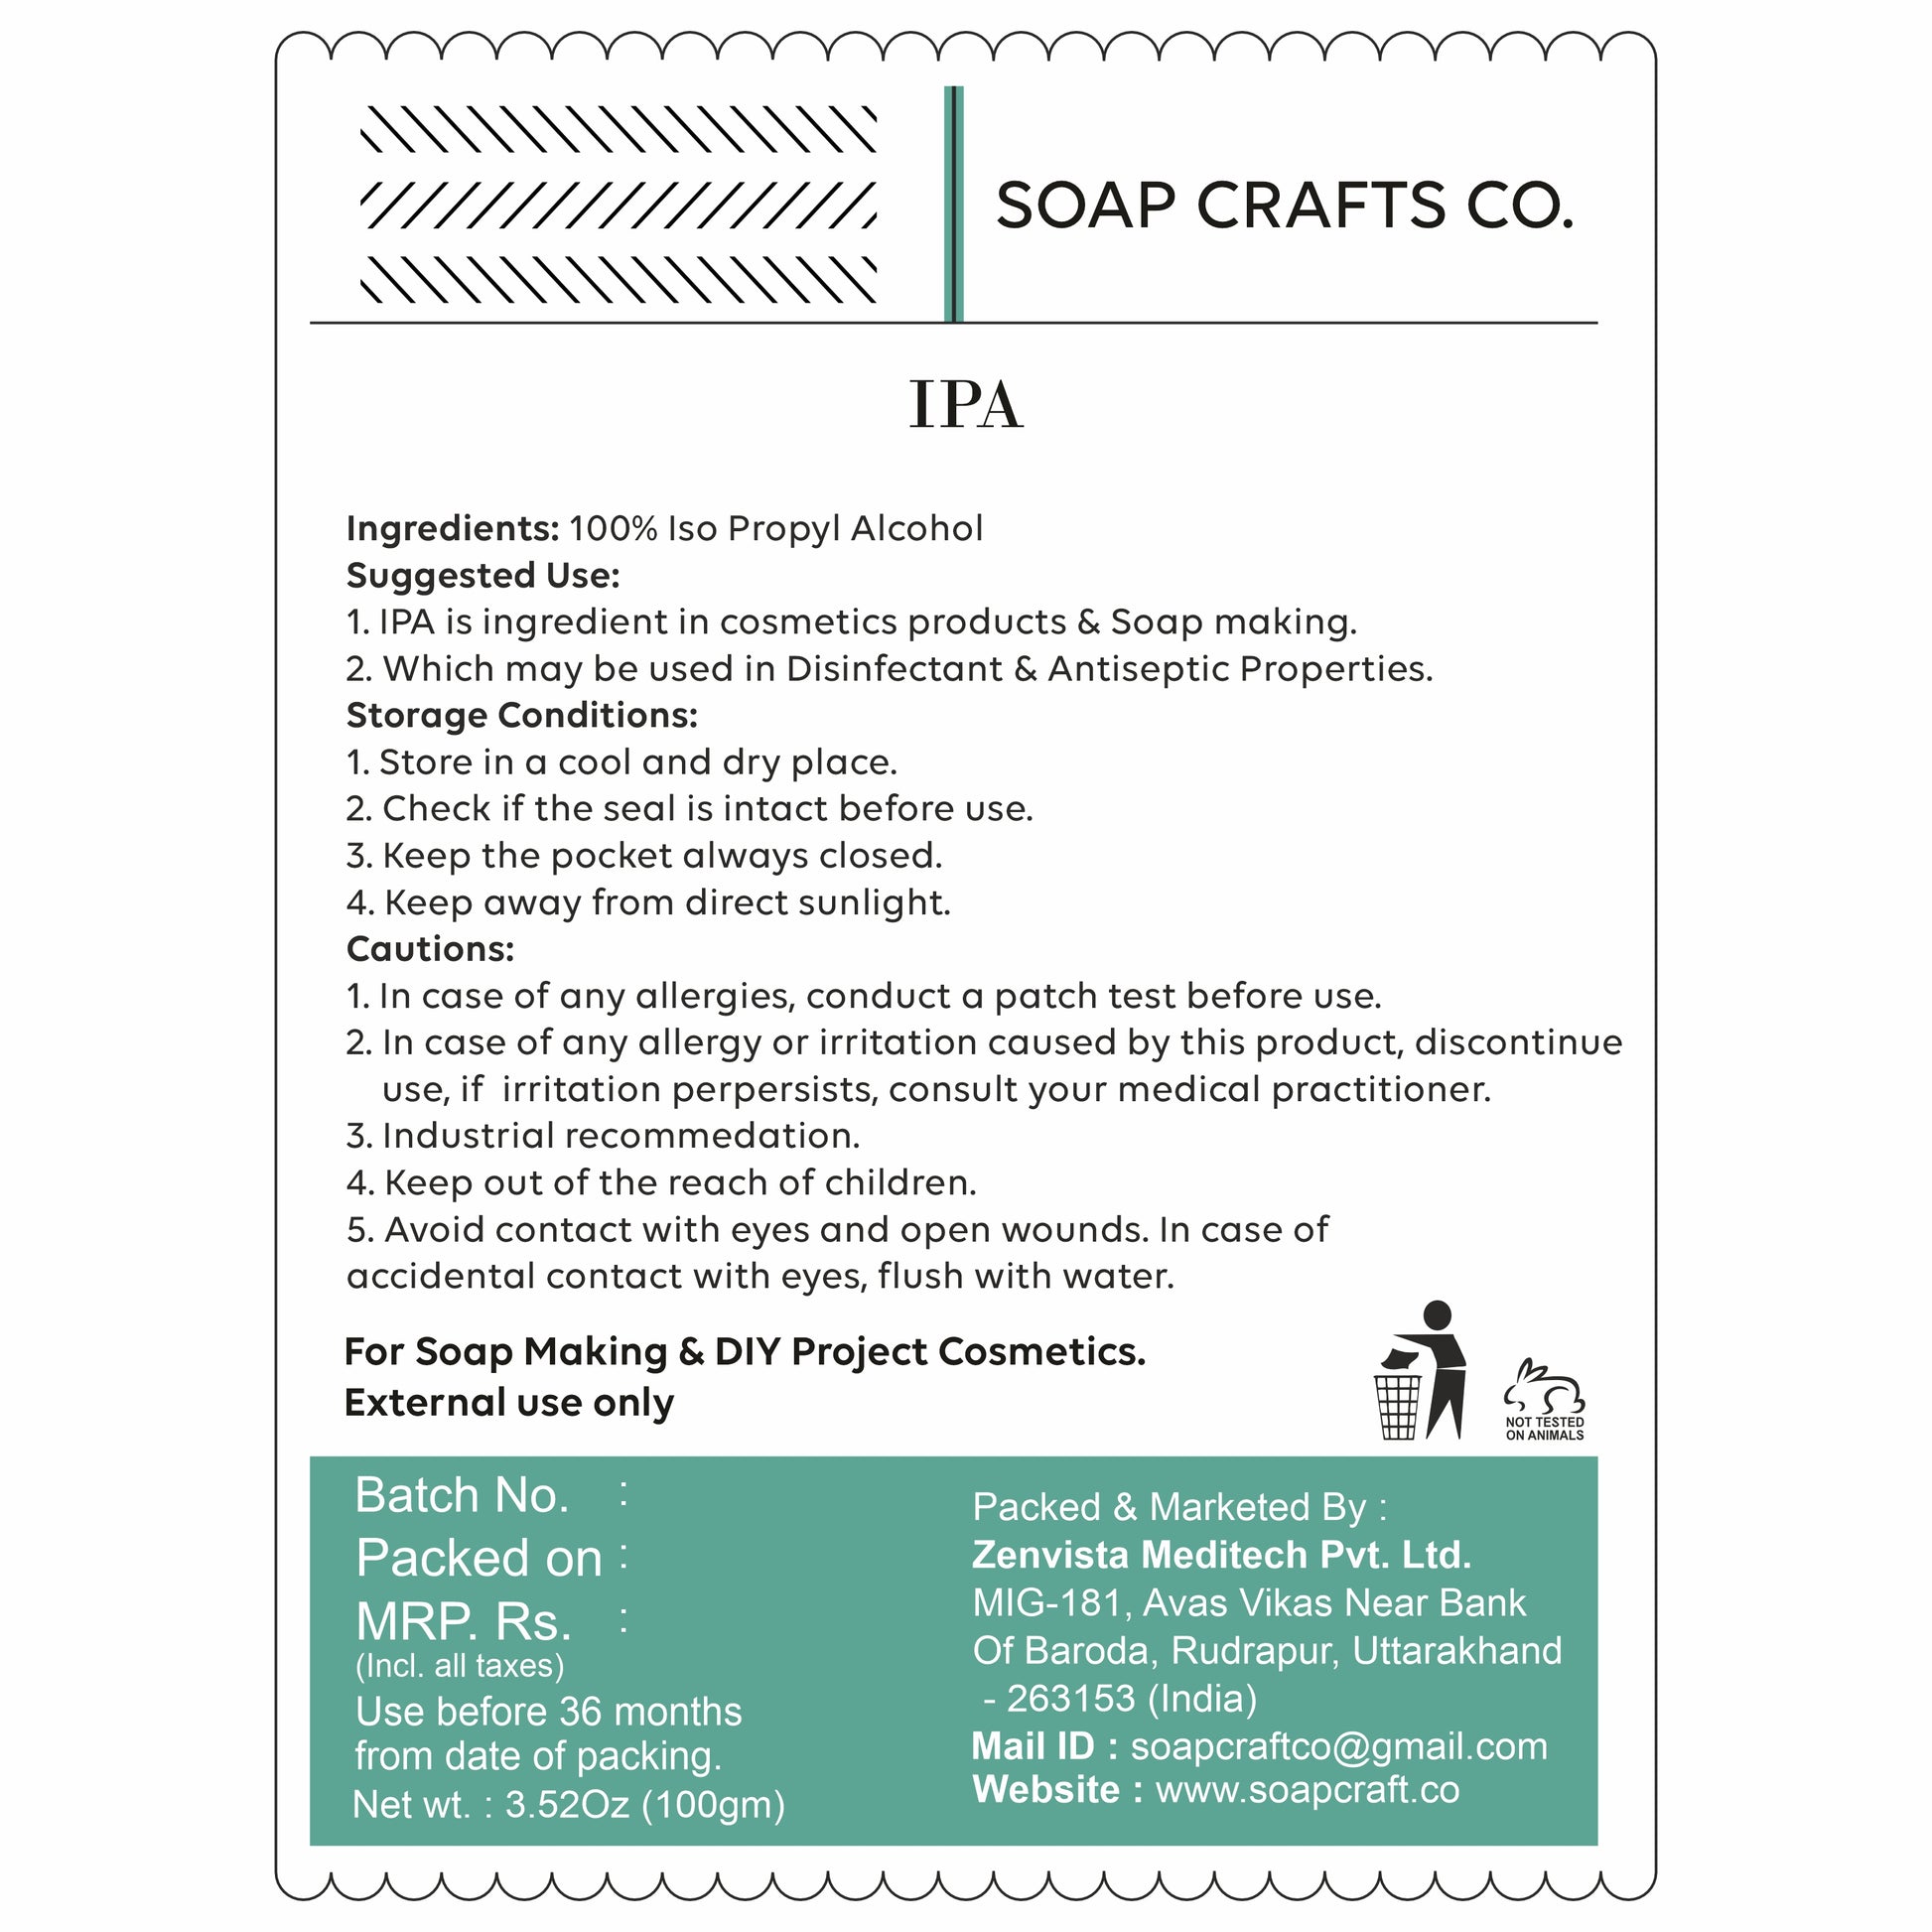 cosmeticmaking, saopmaking, cosmeticmakingingredients, soapmakingingredients,cosmeticingredients,naturalingredients,organicingredients,veganingredients, essentialoils,fragranceoils,carrieroils, carrieroils, butters, clays,botanicals,herbs,preservatives,emulsifiers,surfa ctants,thickeners, thickeners,exfoliants,ISO propyl